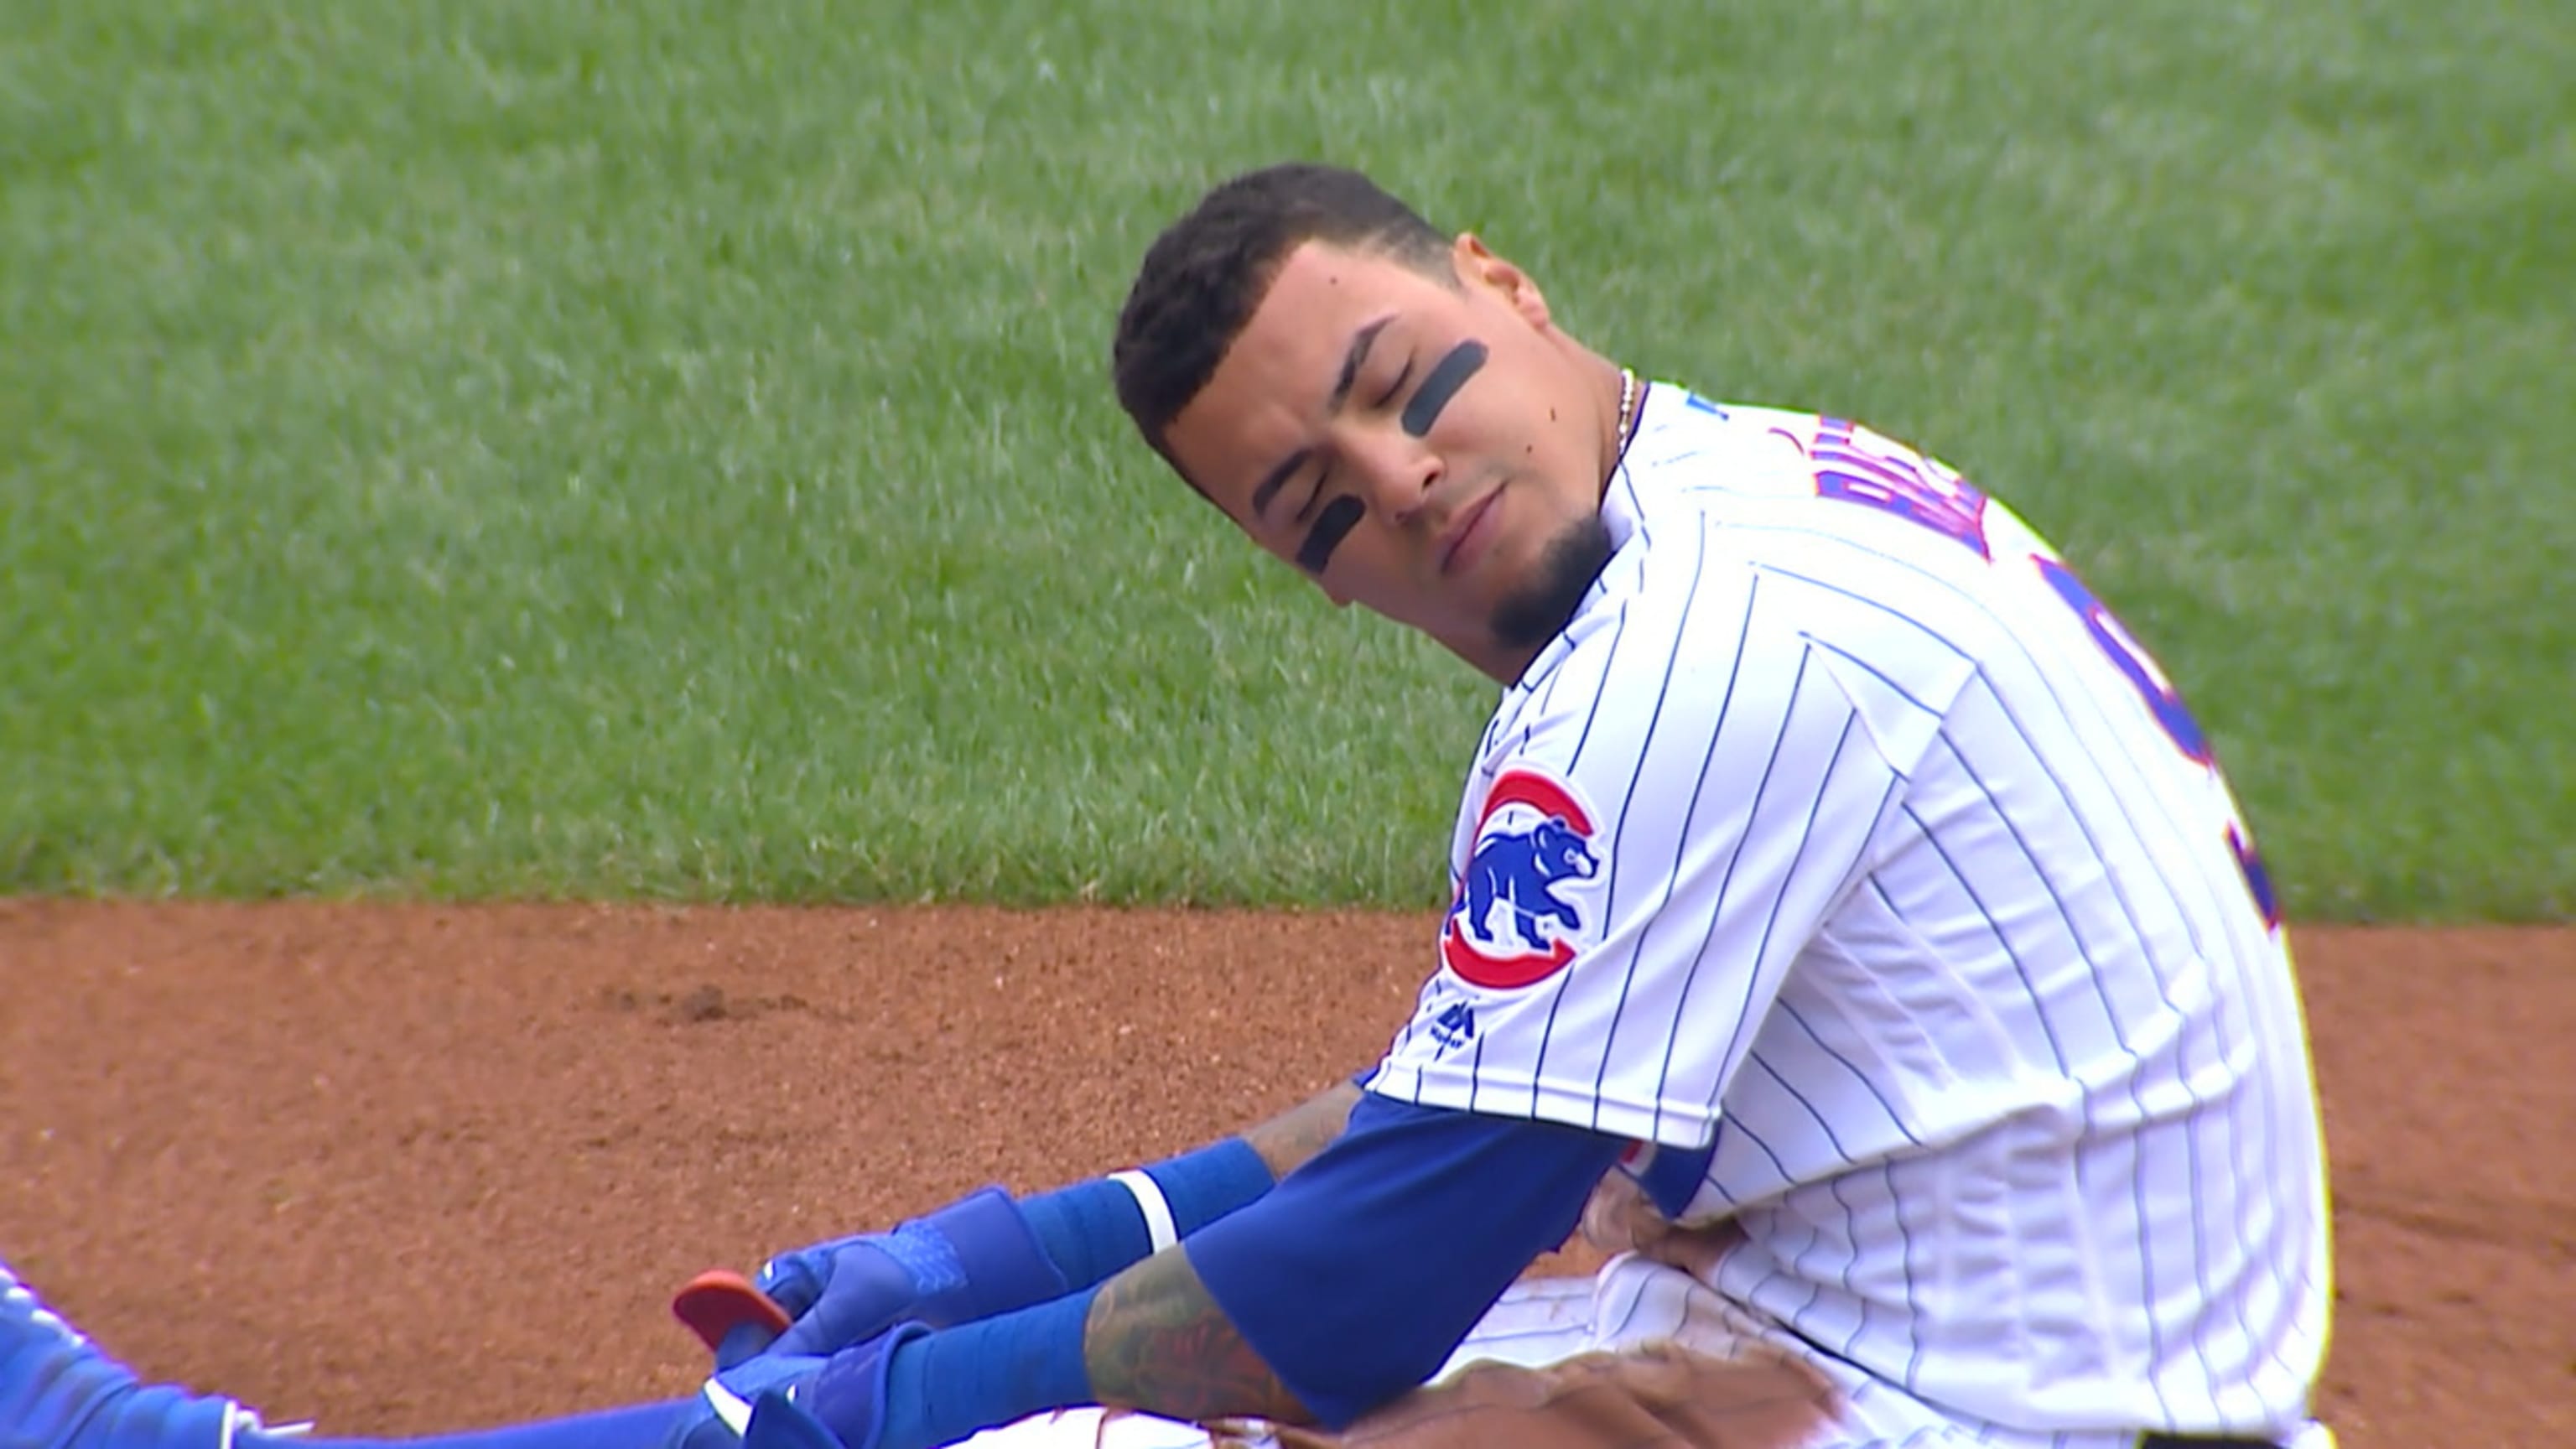 Cubs' Baez to get MRI on thumb, remains out - ESPN